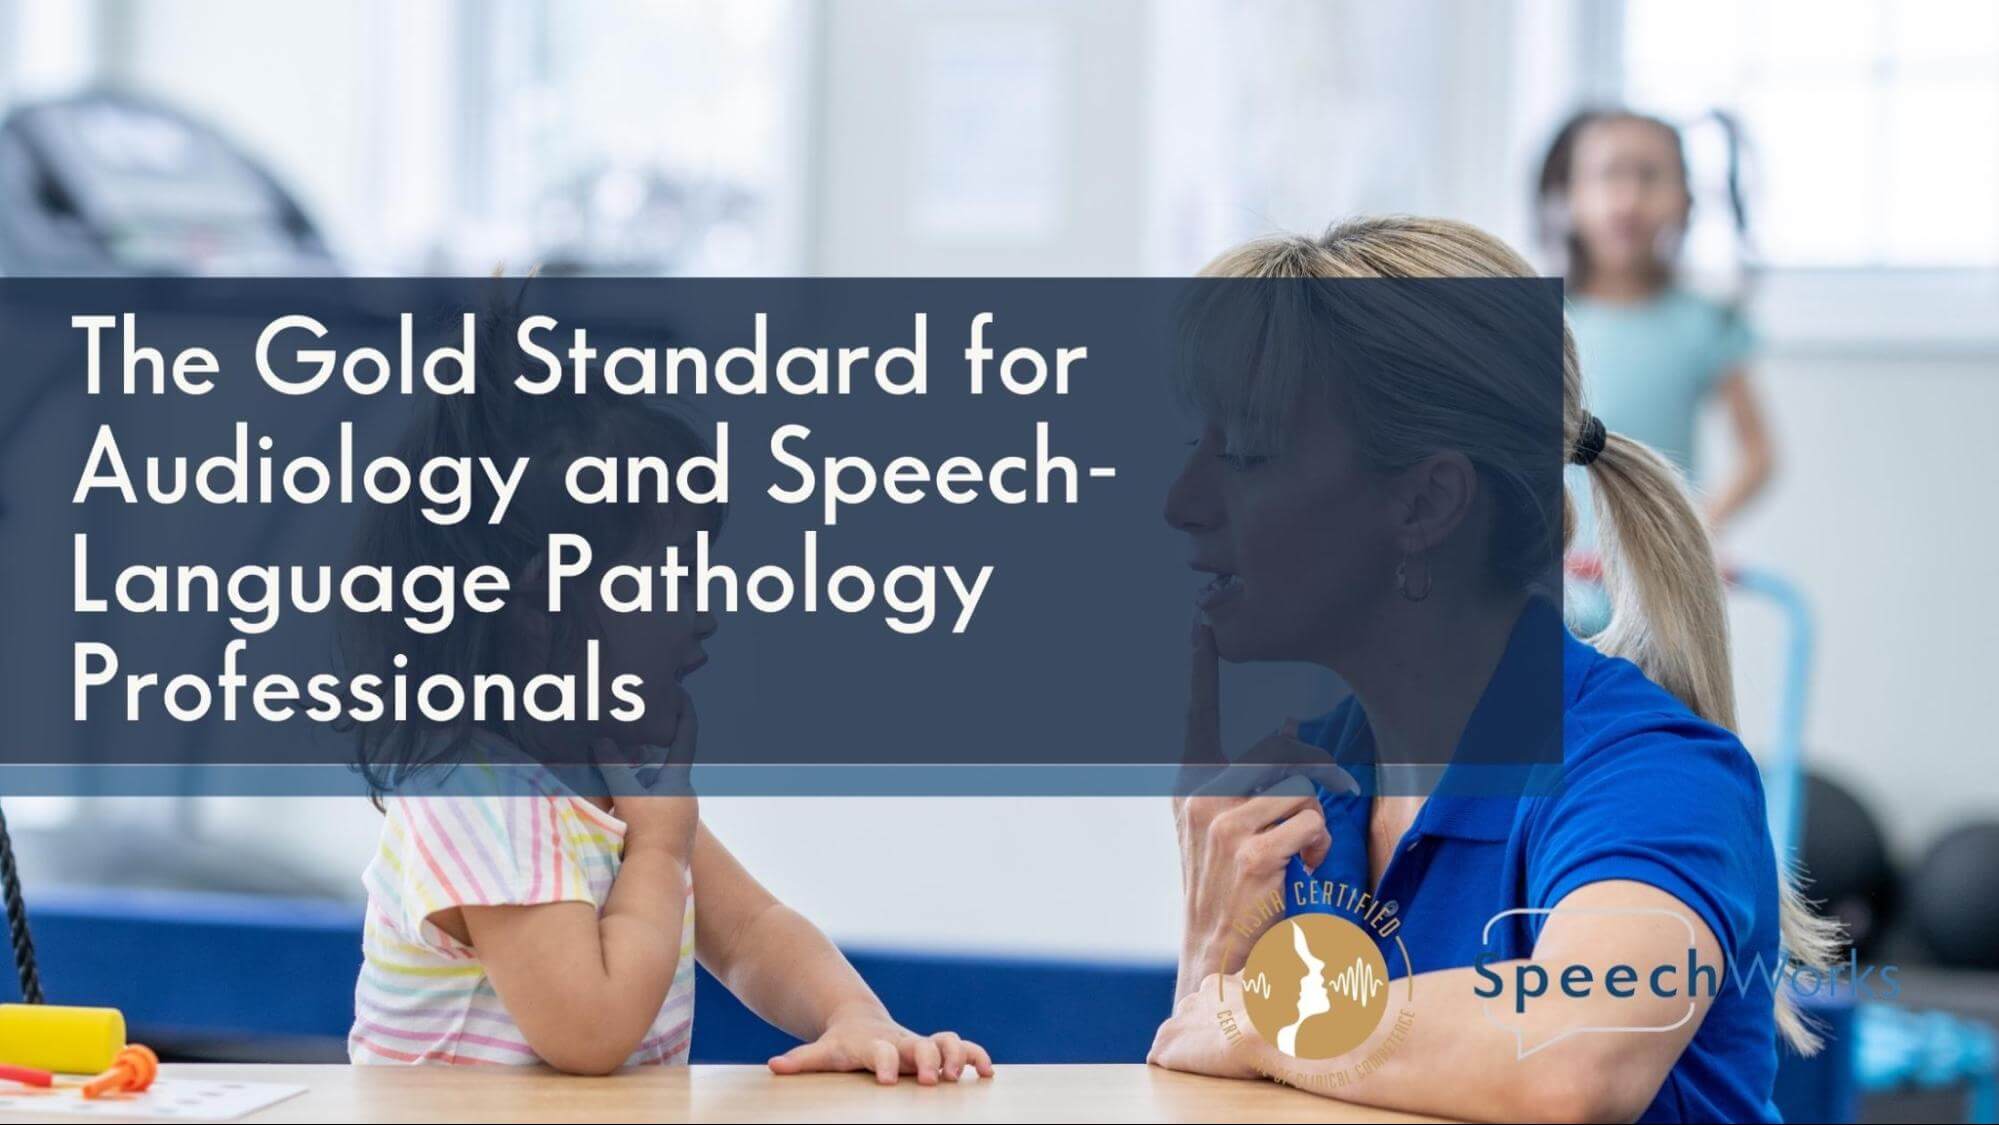 The Gold Standard for Audiology and Speech-Language Pathology Professionals